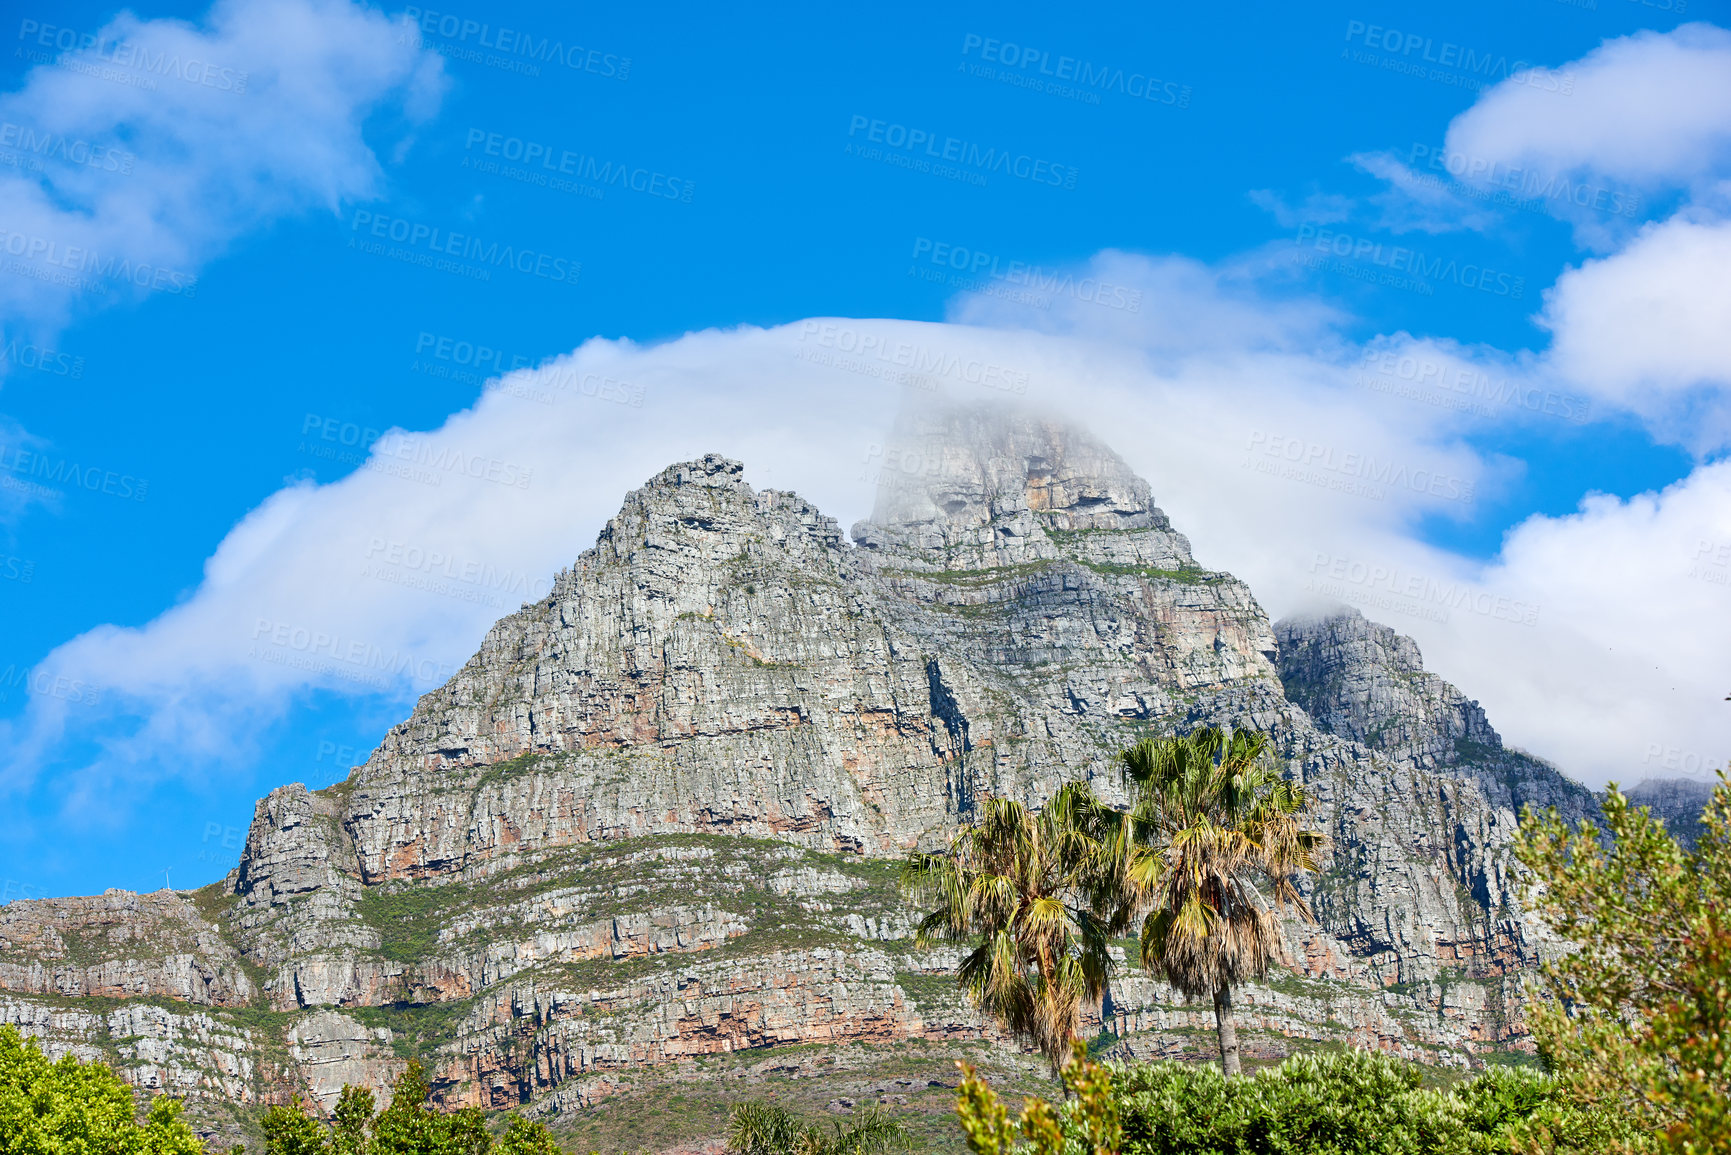 Buy stock photo Lions Head mountain with cloudy blue sky copy space. Beautiful below view of a rocky mountain peak covered in lots of lush green vegetation at a popular tourism destination in Cape Town, South Africa